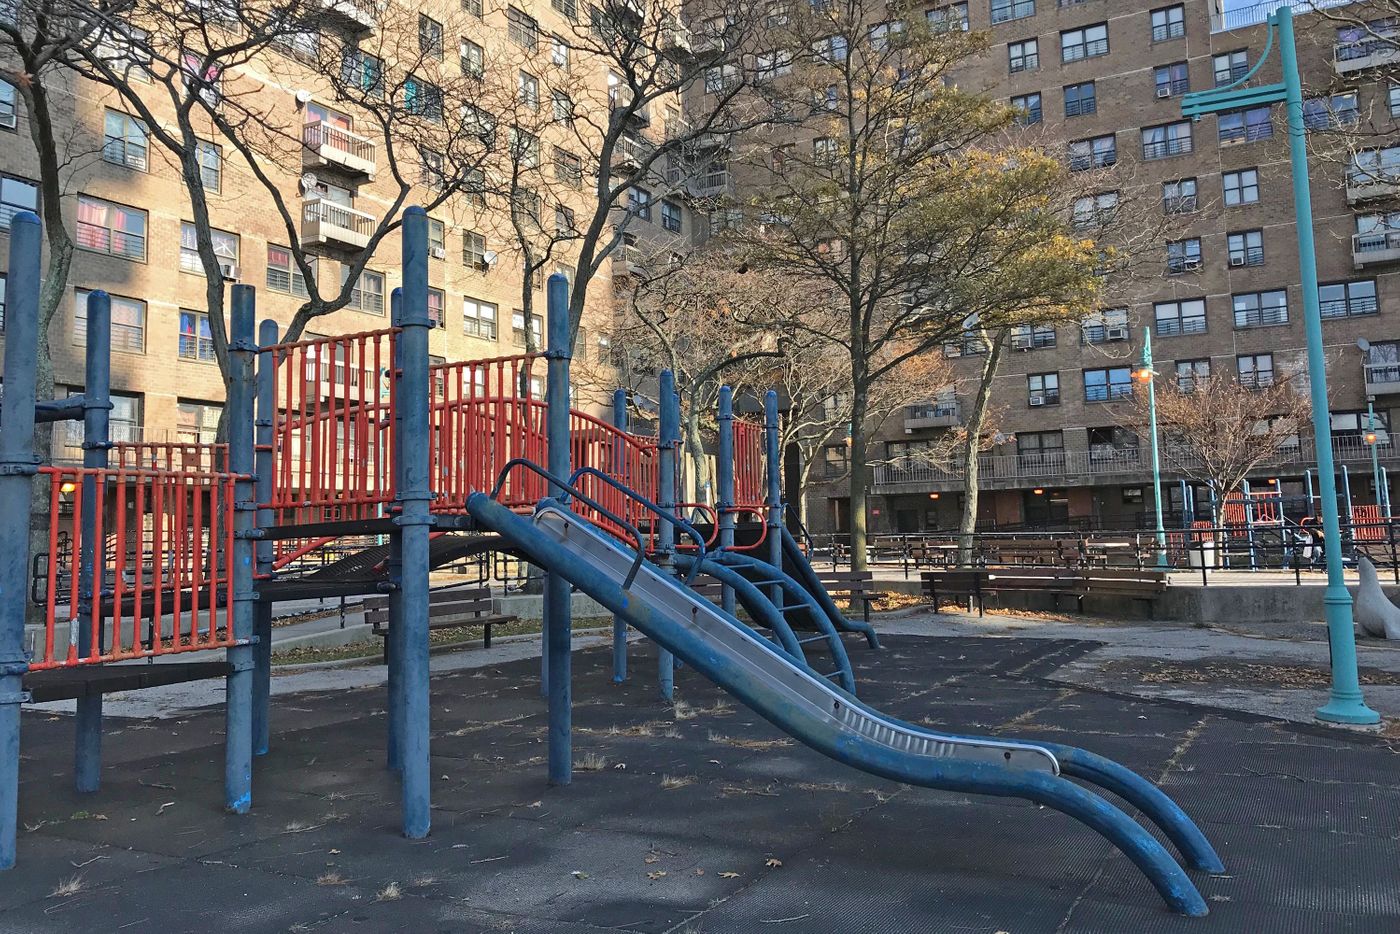 An aging playground at O’Dwyer Gardens in Coney Island was slated to be redone after Hurricane Sandy.